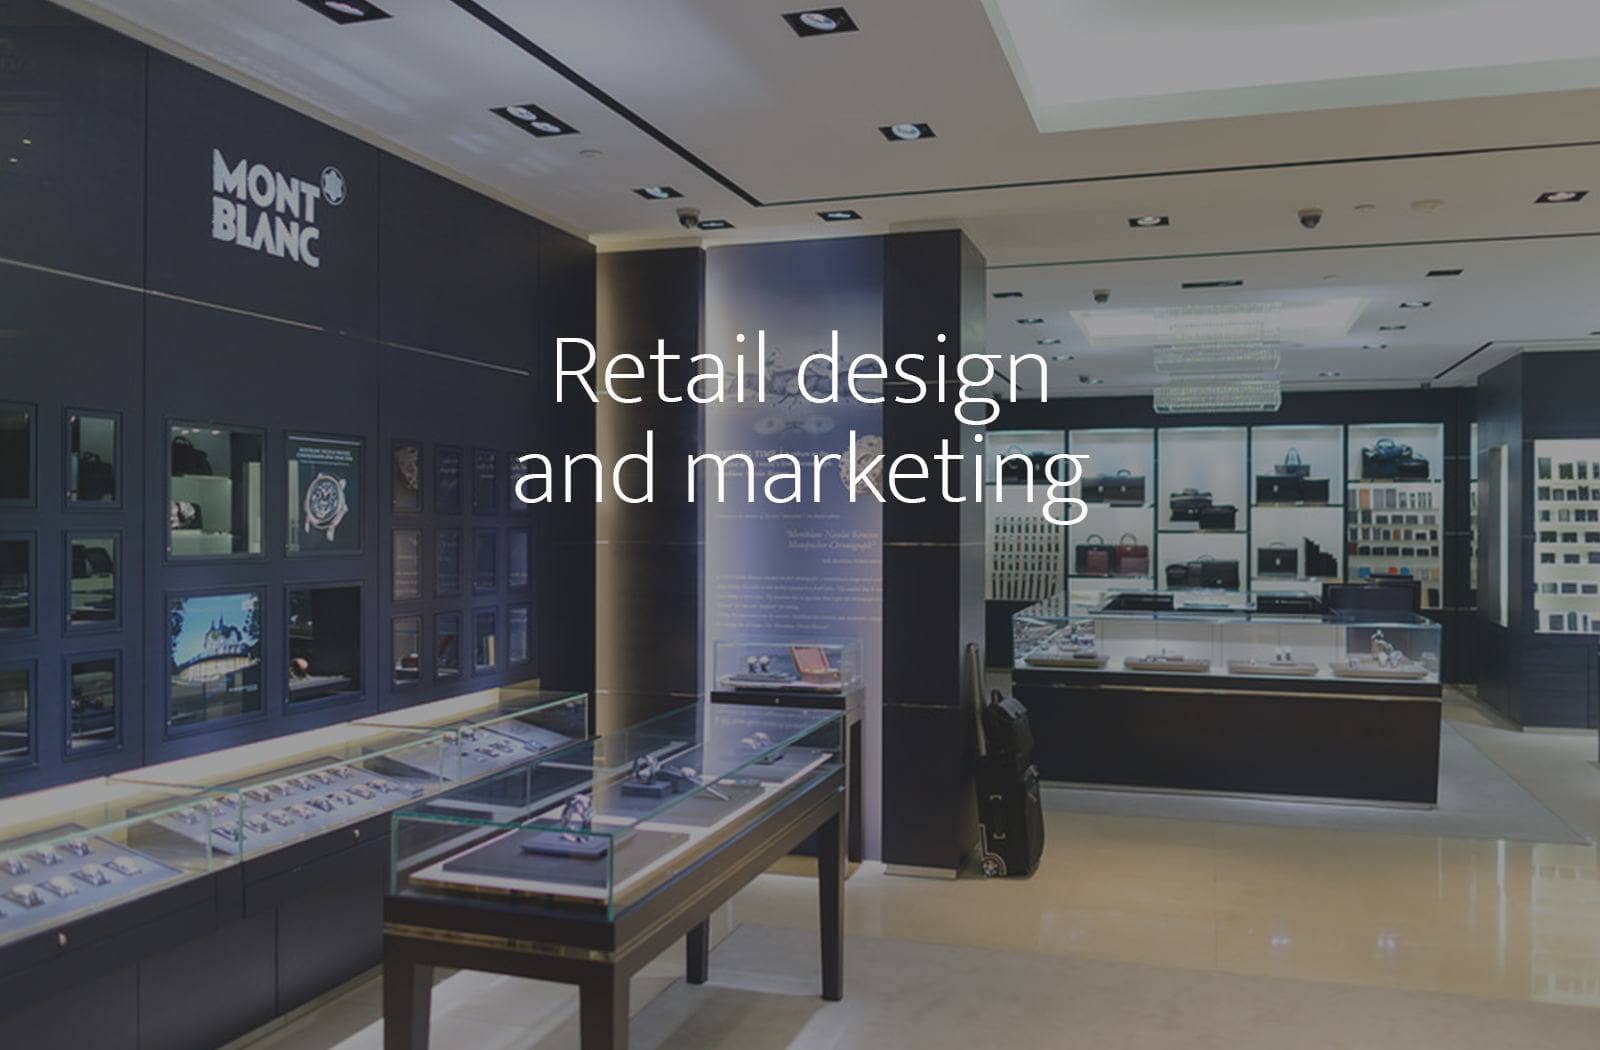 Recruitment, assessment and development for Retail design and marketing